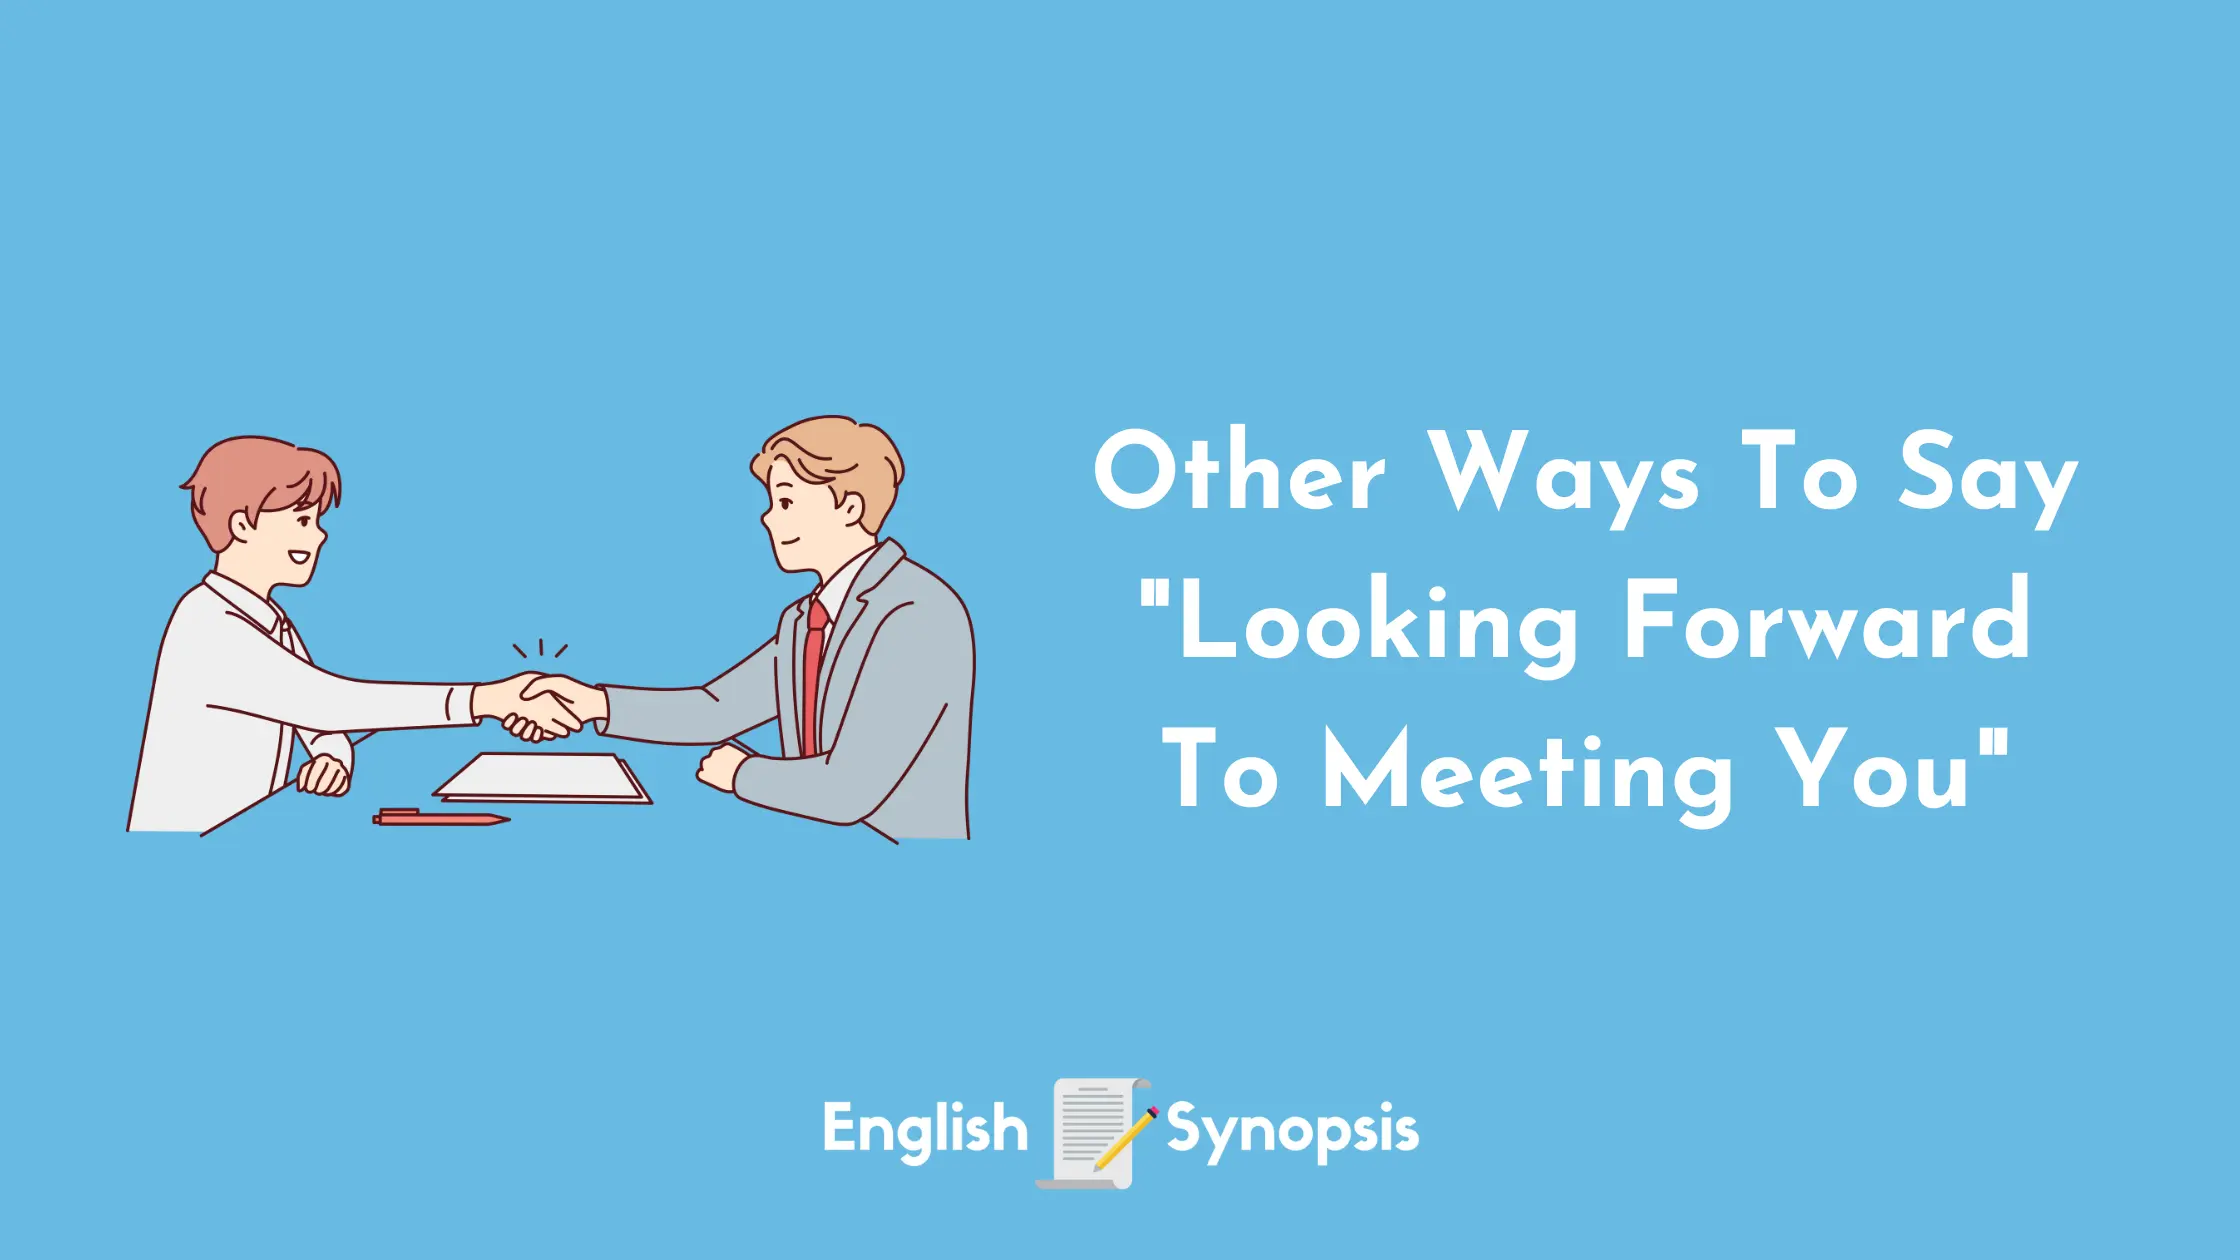 Other Ways To Say "Looking Forward To Meeting You"